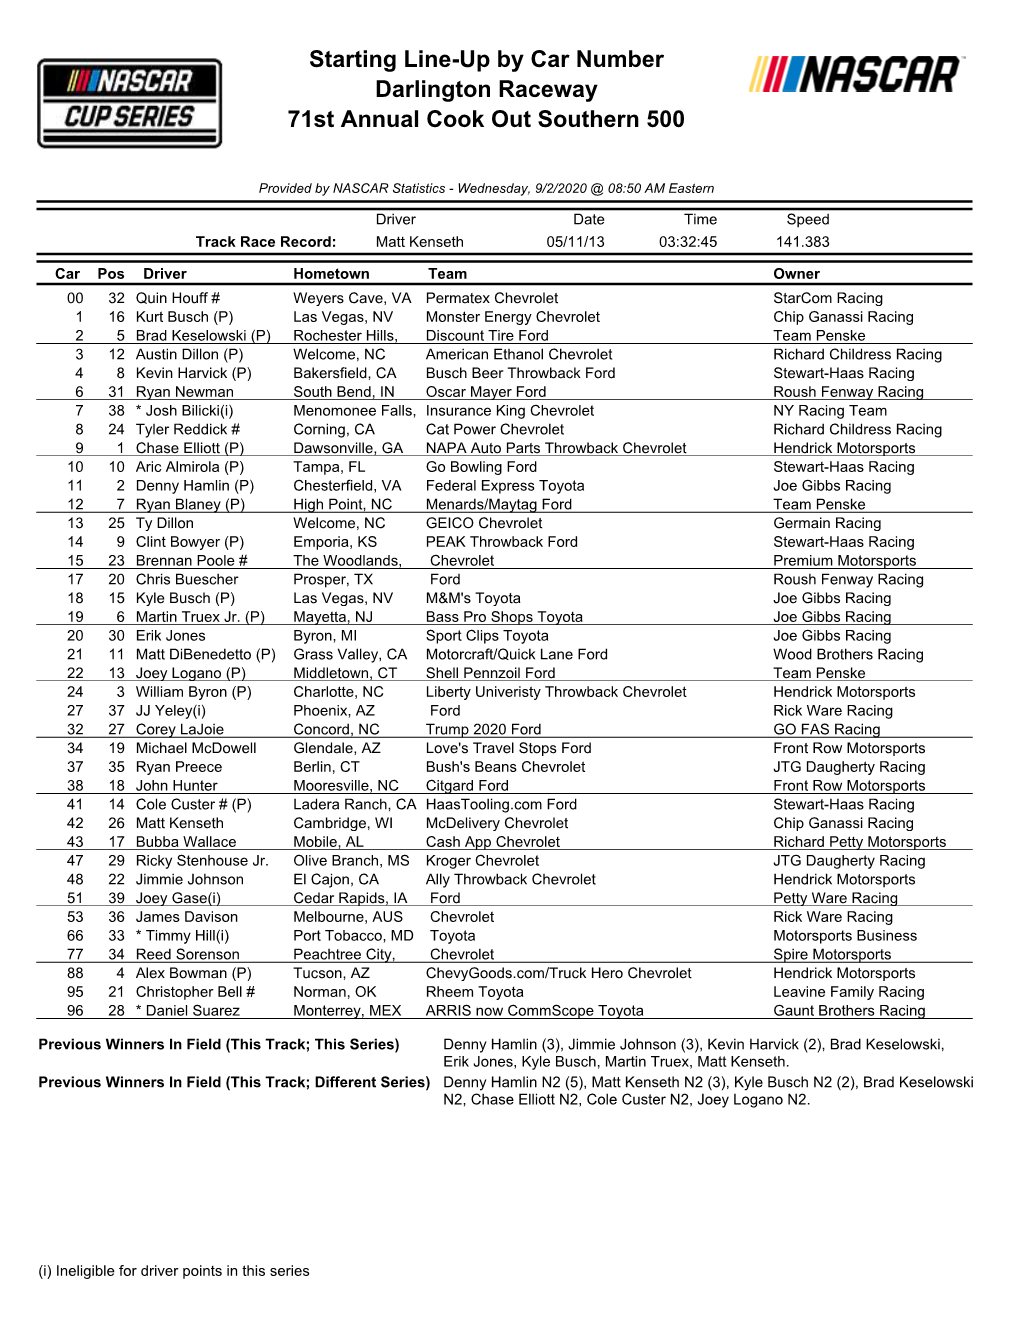 Starting Line-Up by Car Number Darlington Raceway 71St Annual Cook out Southern 500